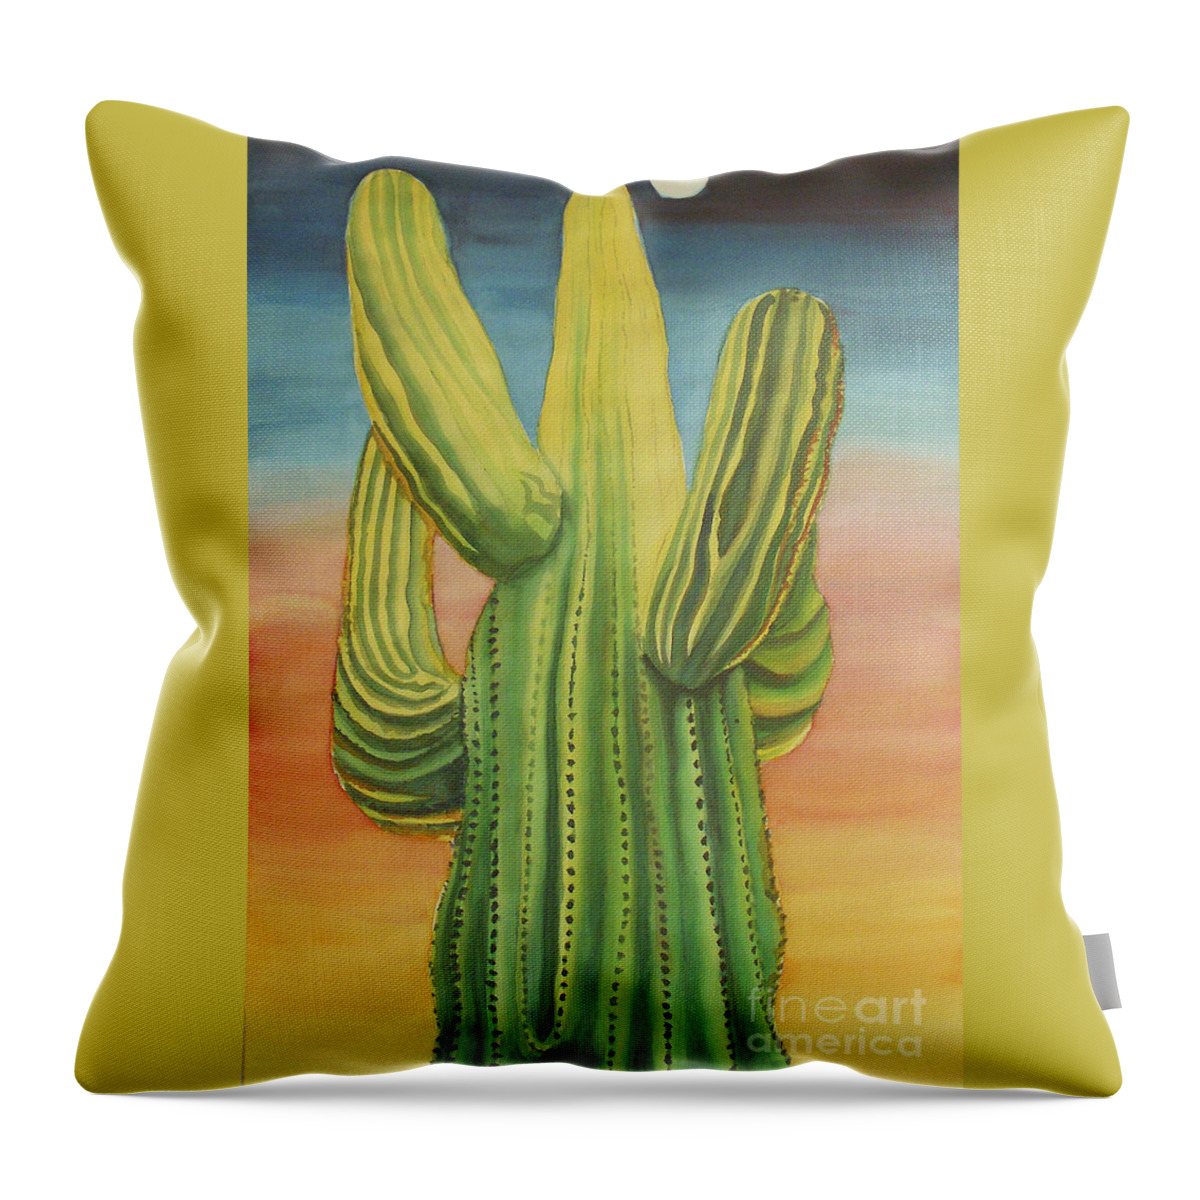 Arizona Throw Pillow featuring the painting Arizona Cactus by Robyn Saunders